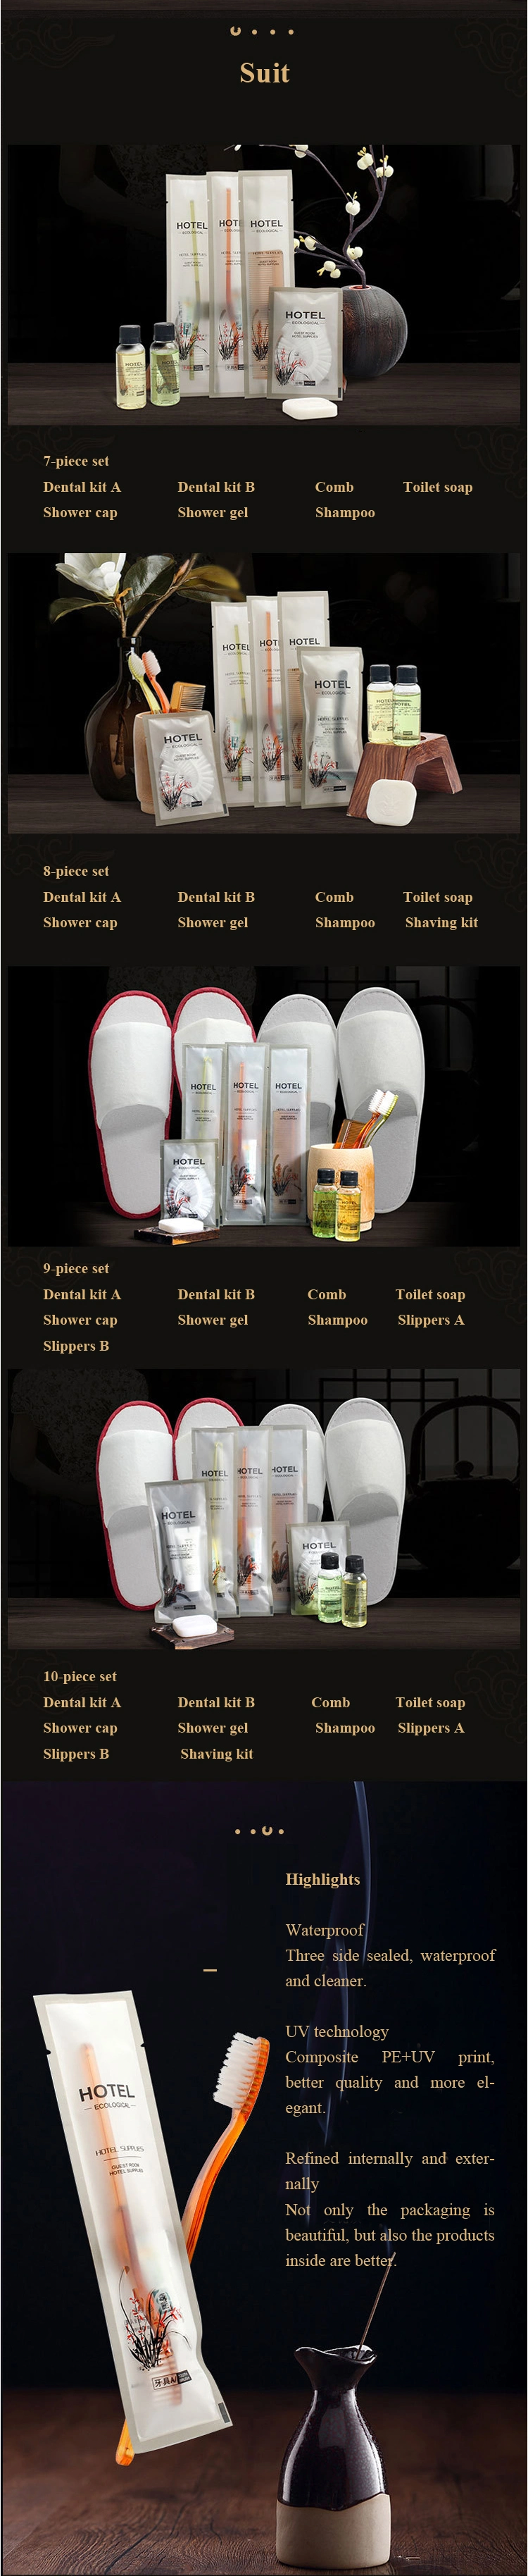 5 Star Amenity Set with Luxury Hotel Shampoo in Shiny Cosmetic Bottle Dimensions